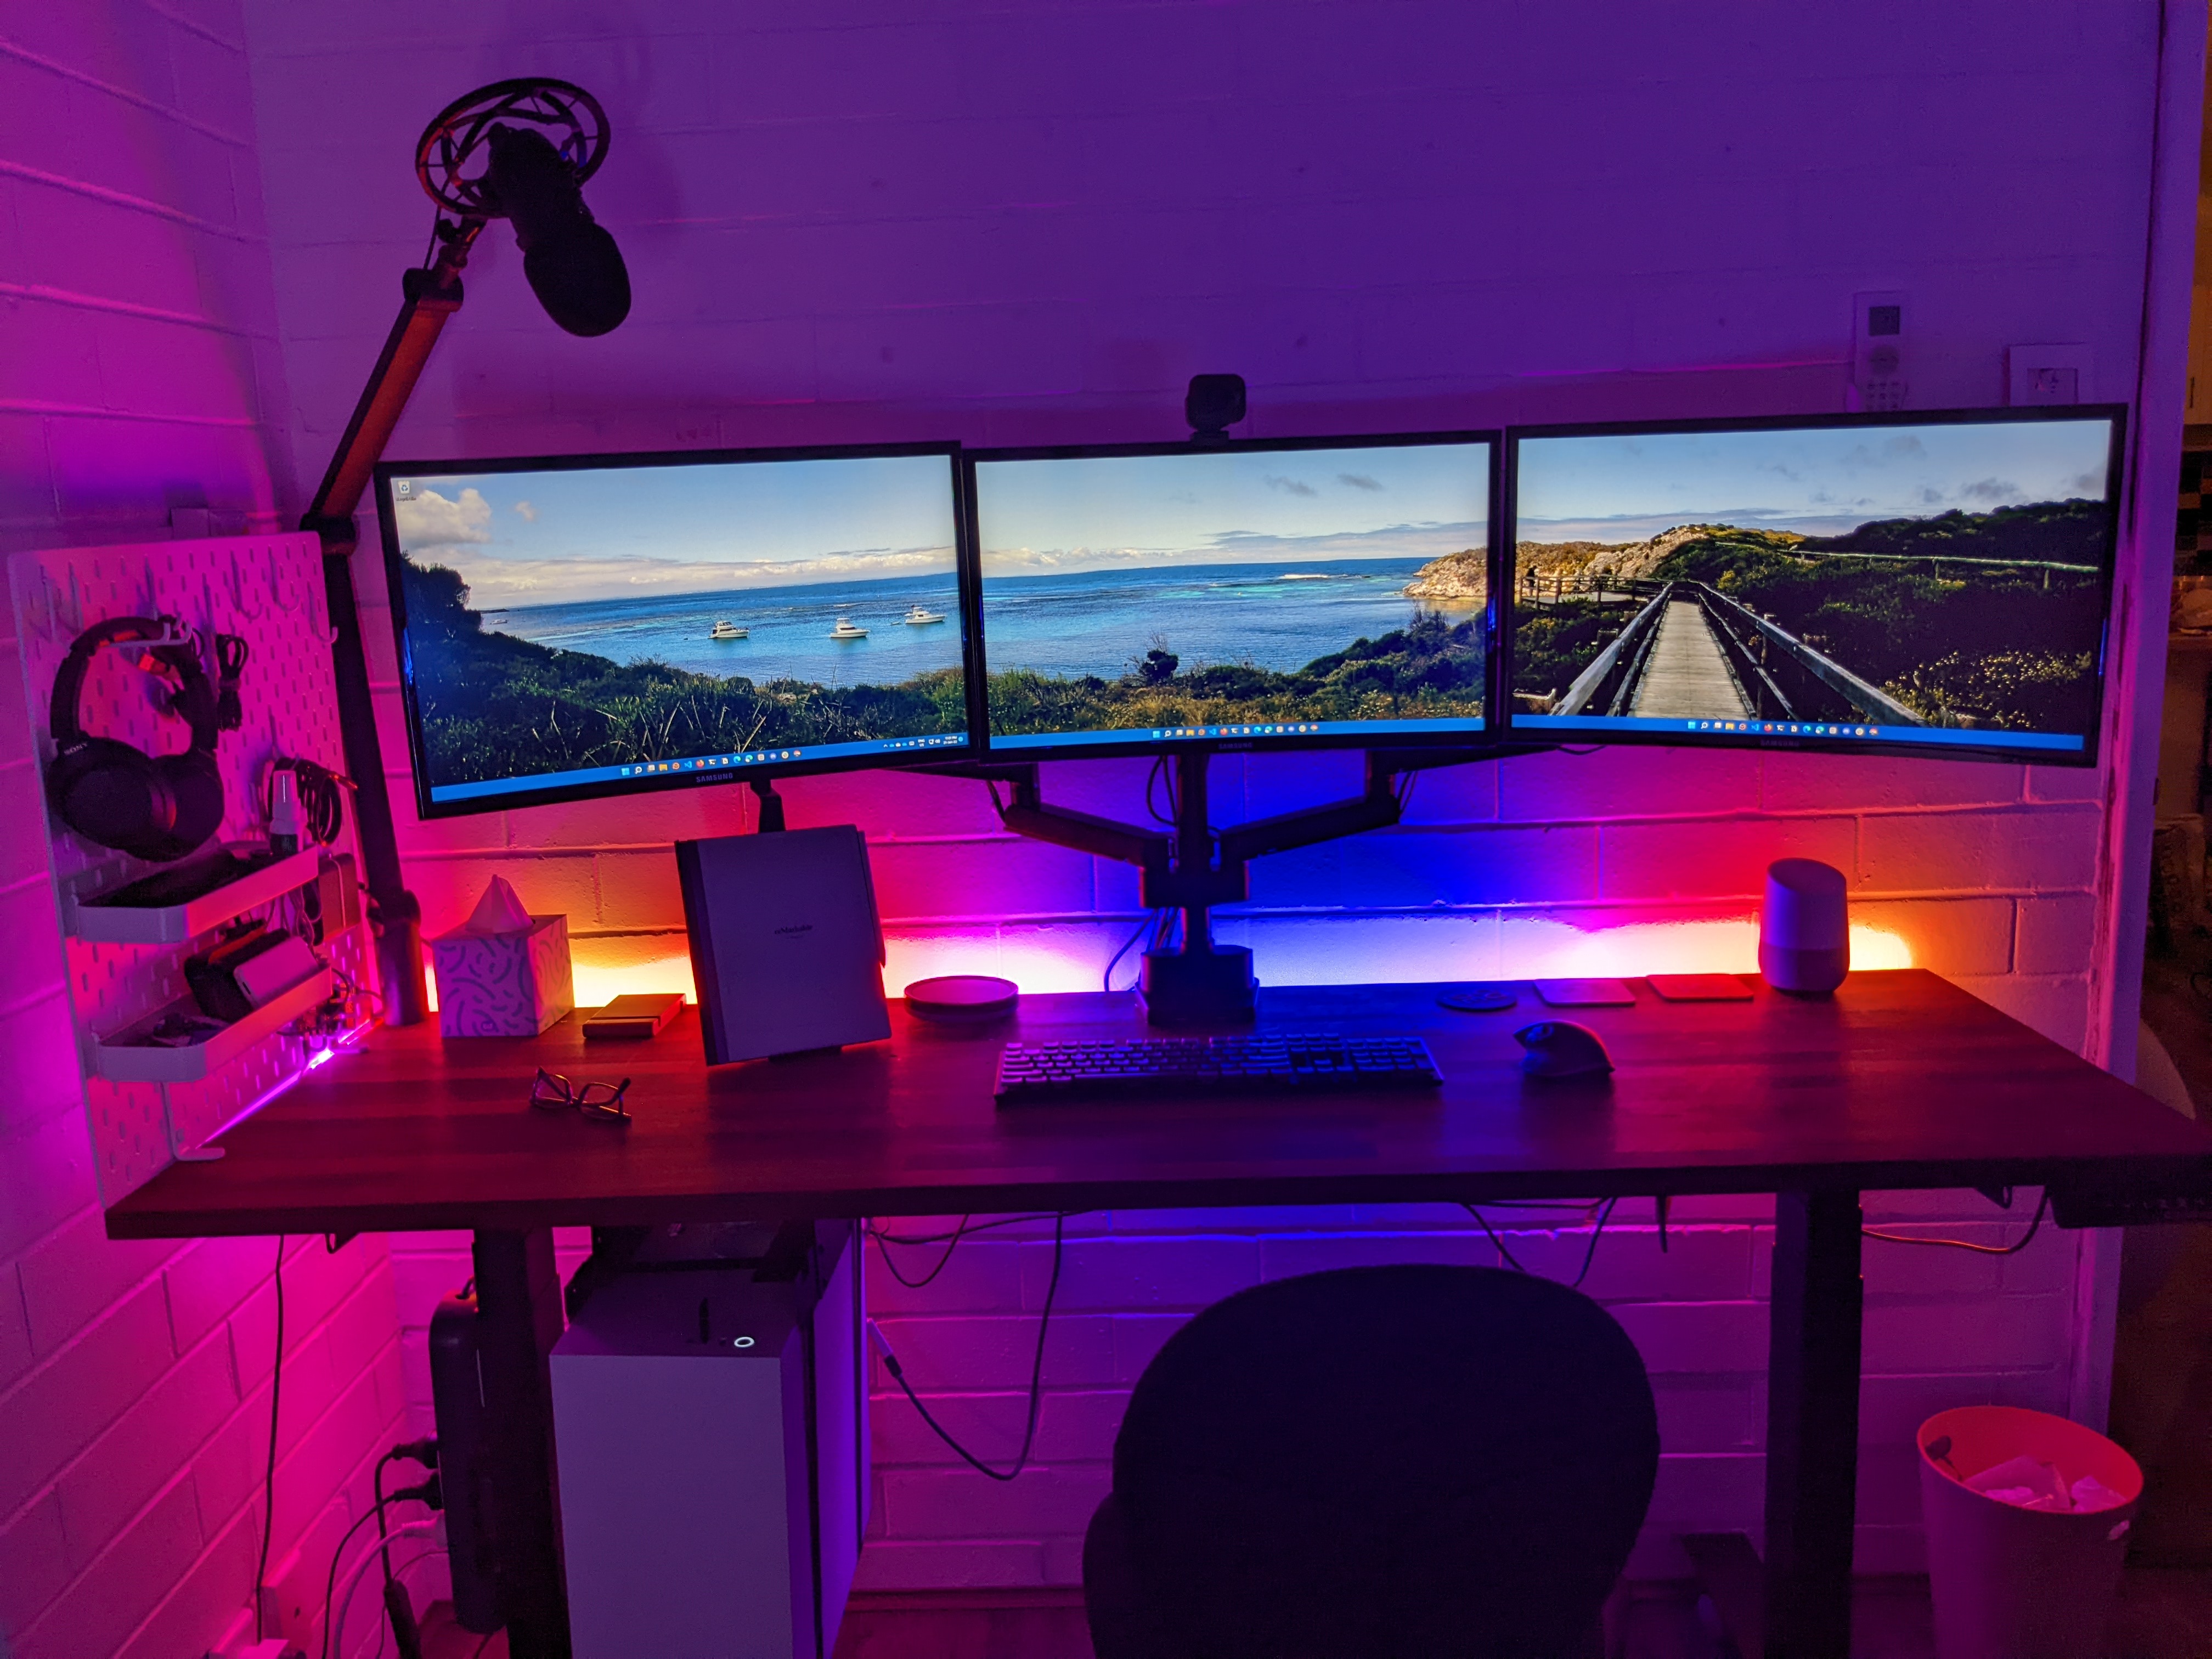 Assembled desk with three monitors, this time dimly lit to show the rainbow LED lighting on the back of the desk